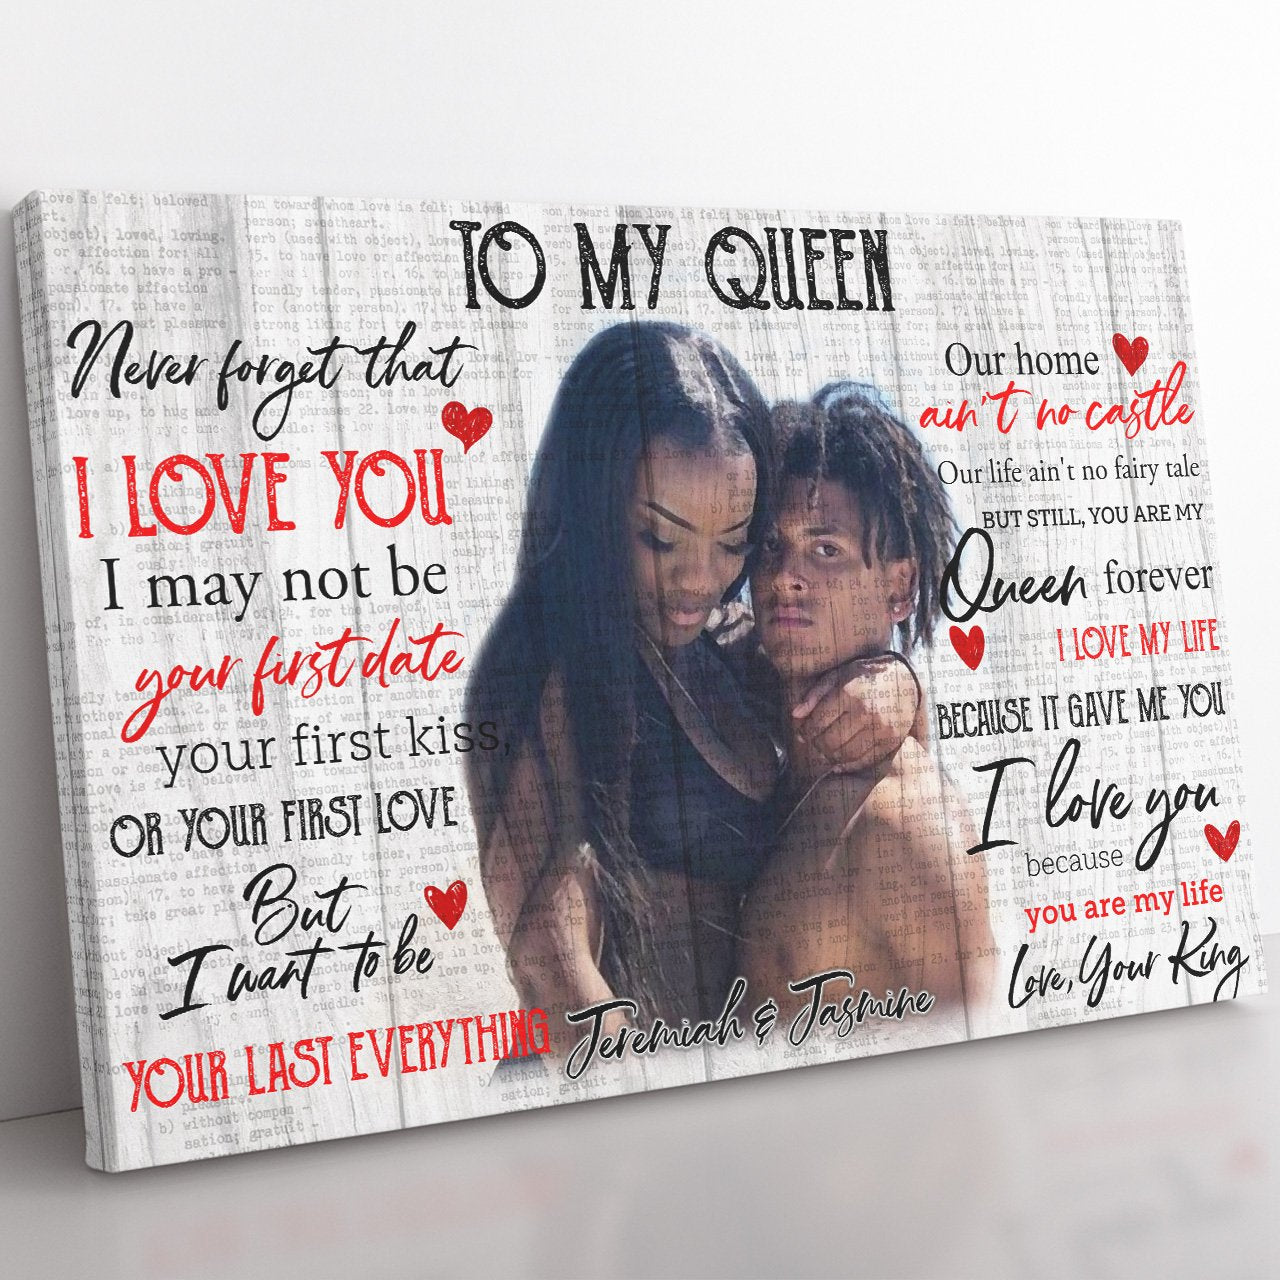 To My Black Queen Canvas Gift Ideas, I Want to be Your Last Canvas, You're My Life Canvas for Black Wife, Unique Anniversary Christmas Gifts For Her